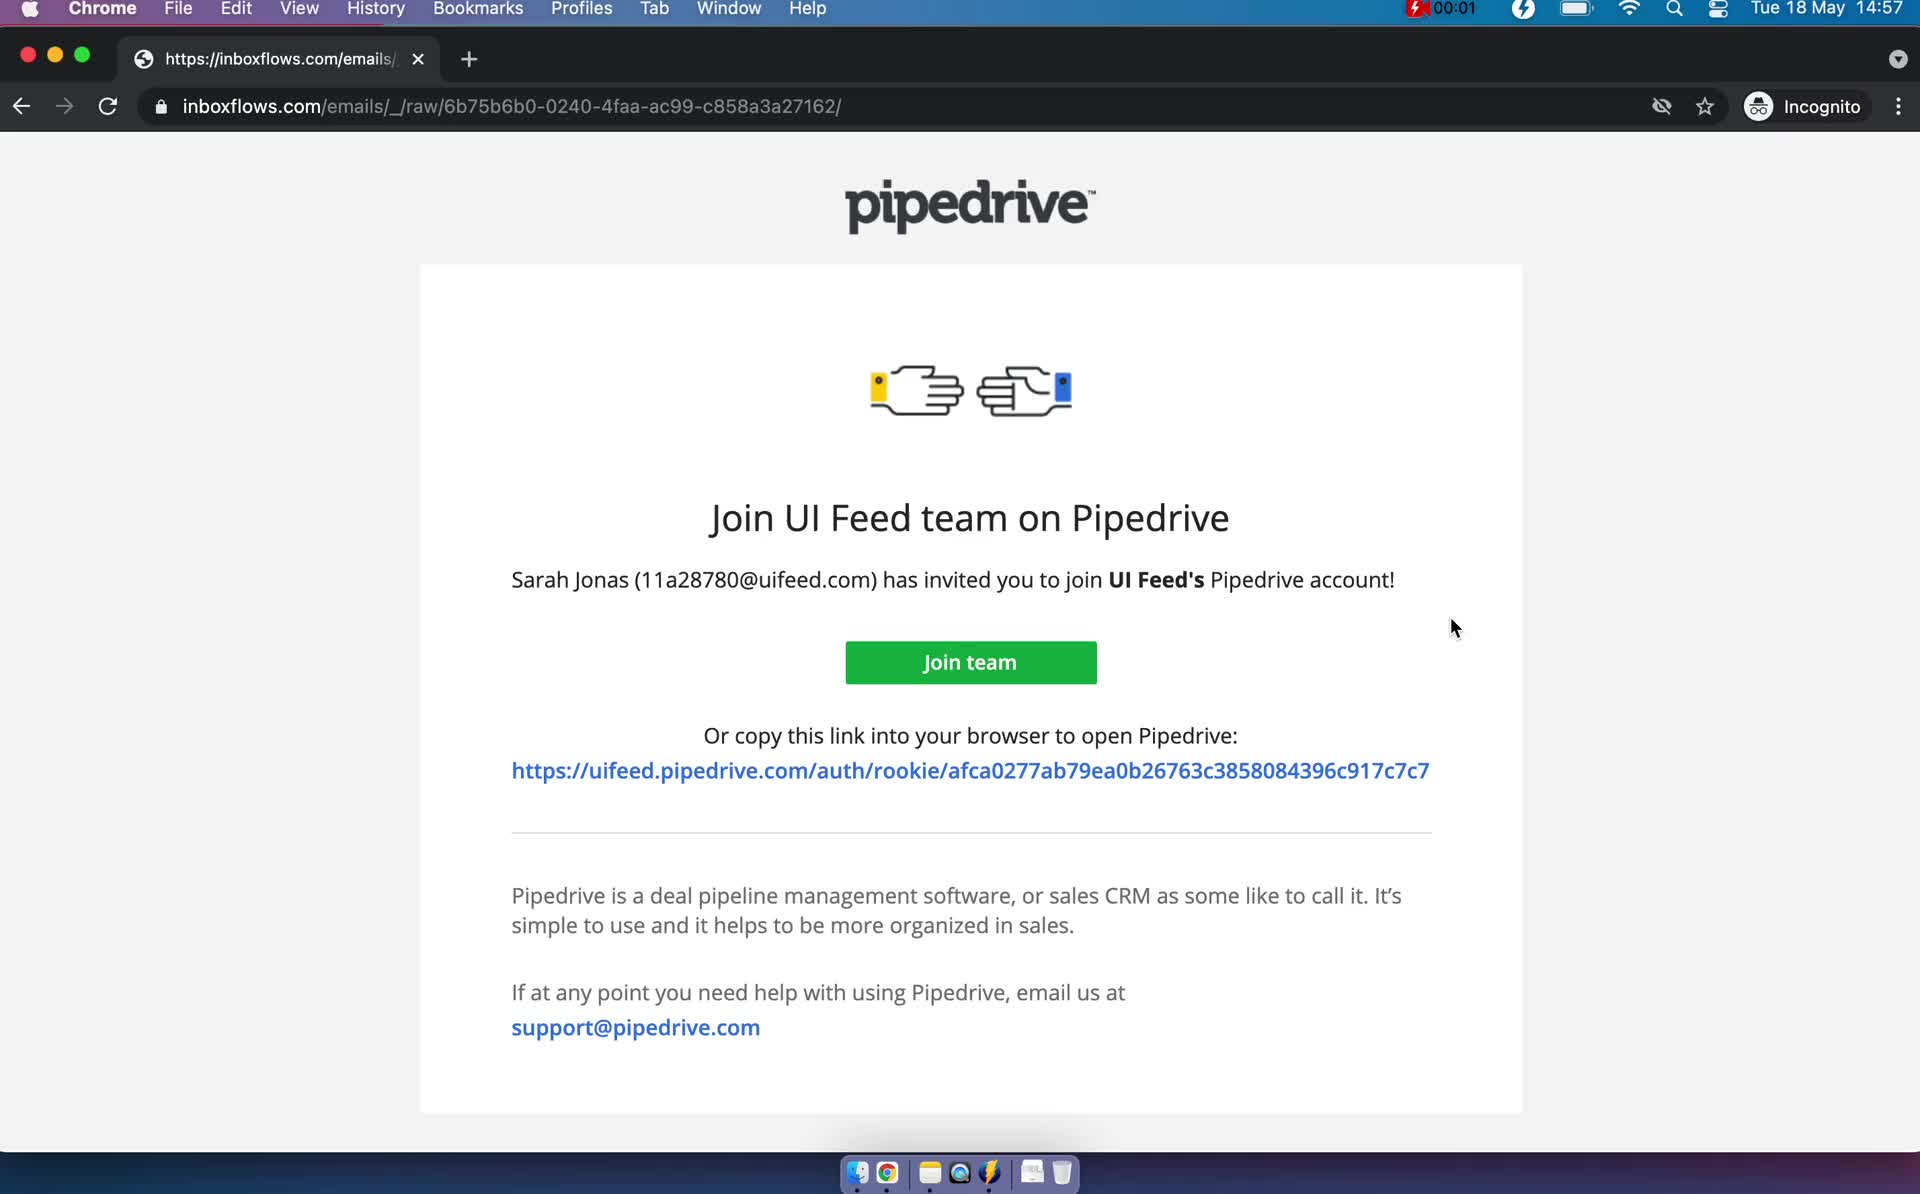 Accepting an invite on Pipedrive video screenshot